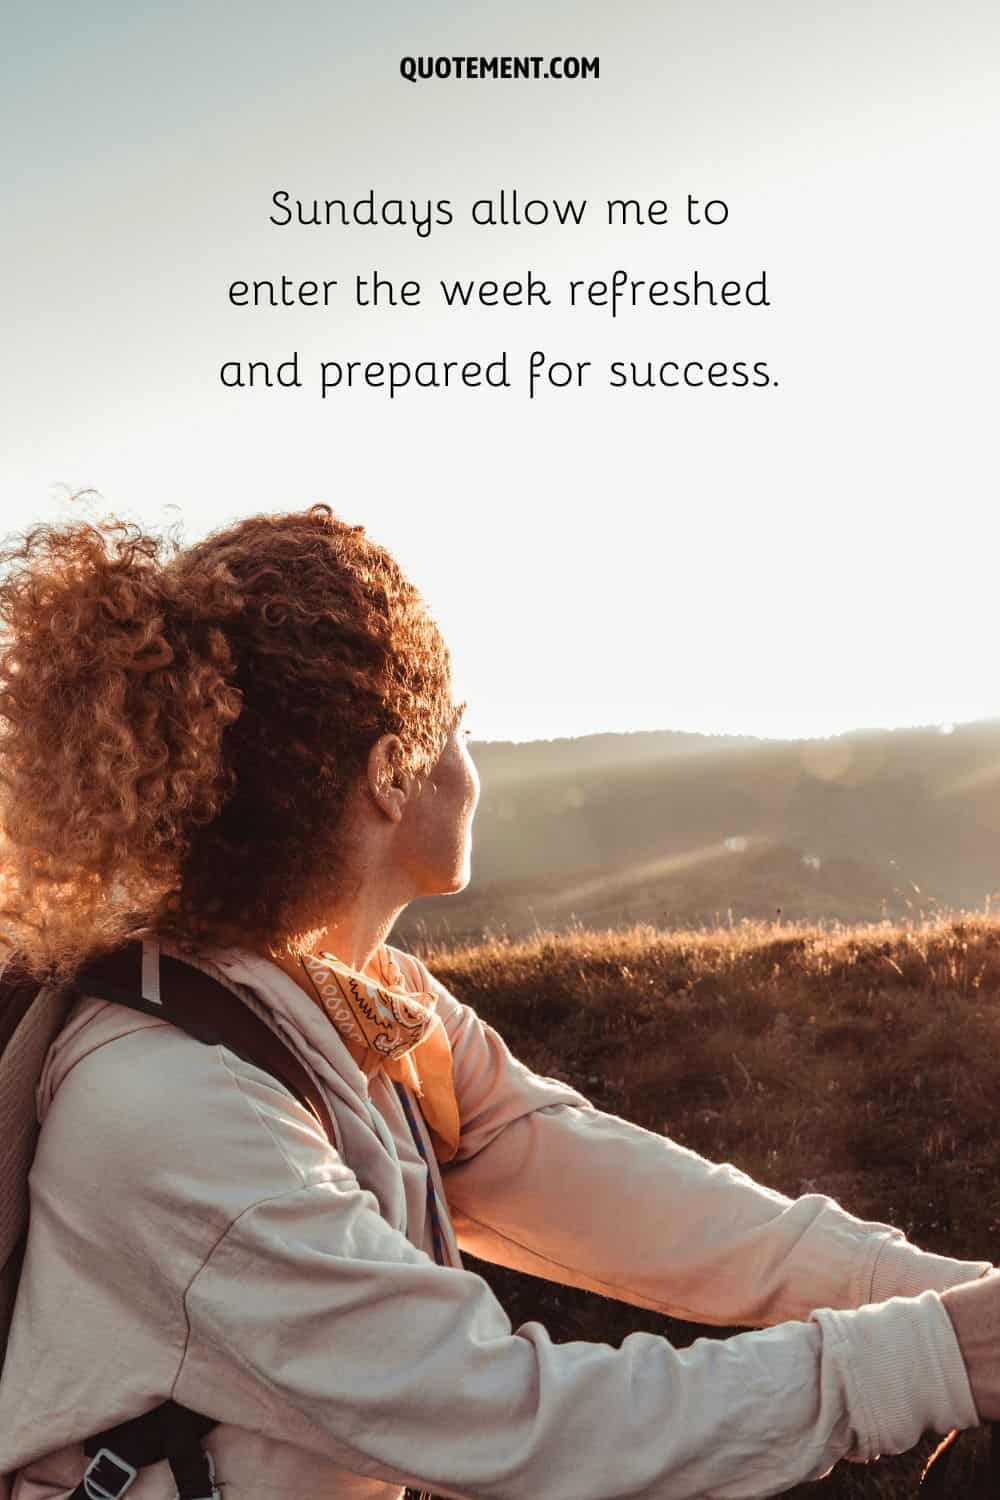 “Sundays allow me to enter the week refreshed and prepared for success.”